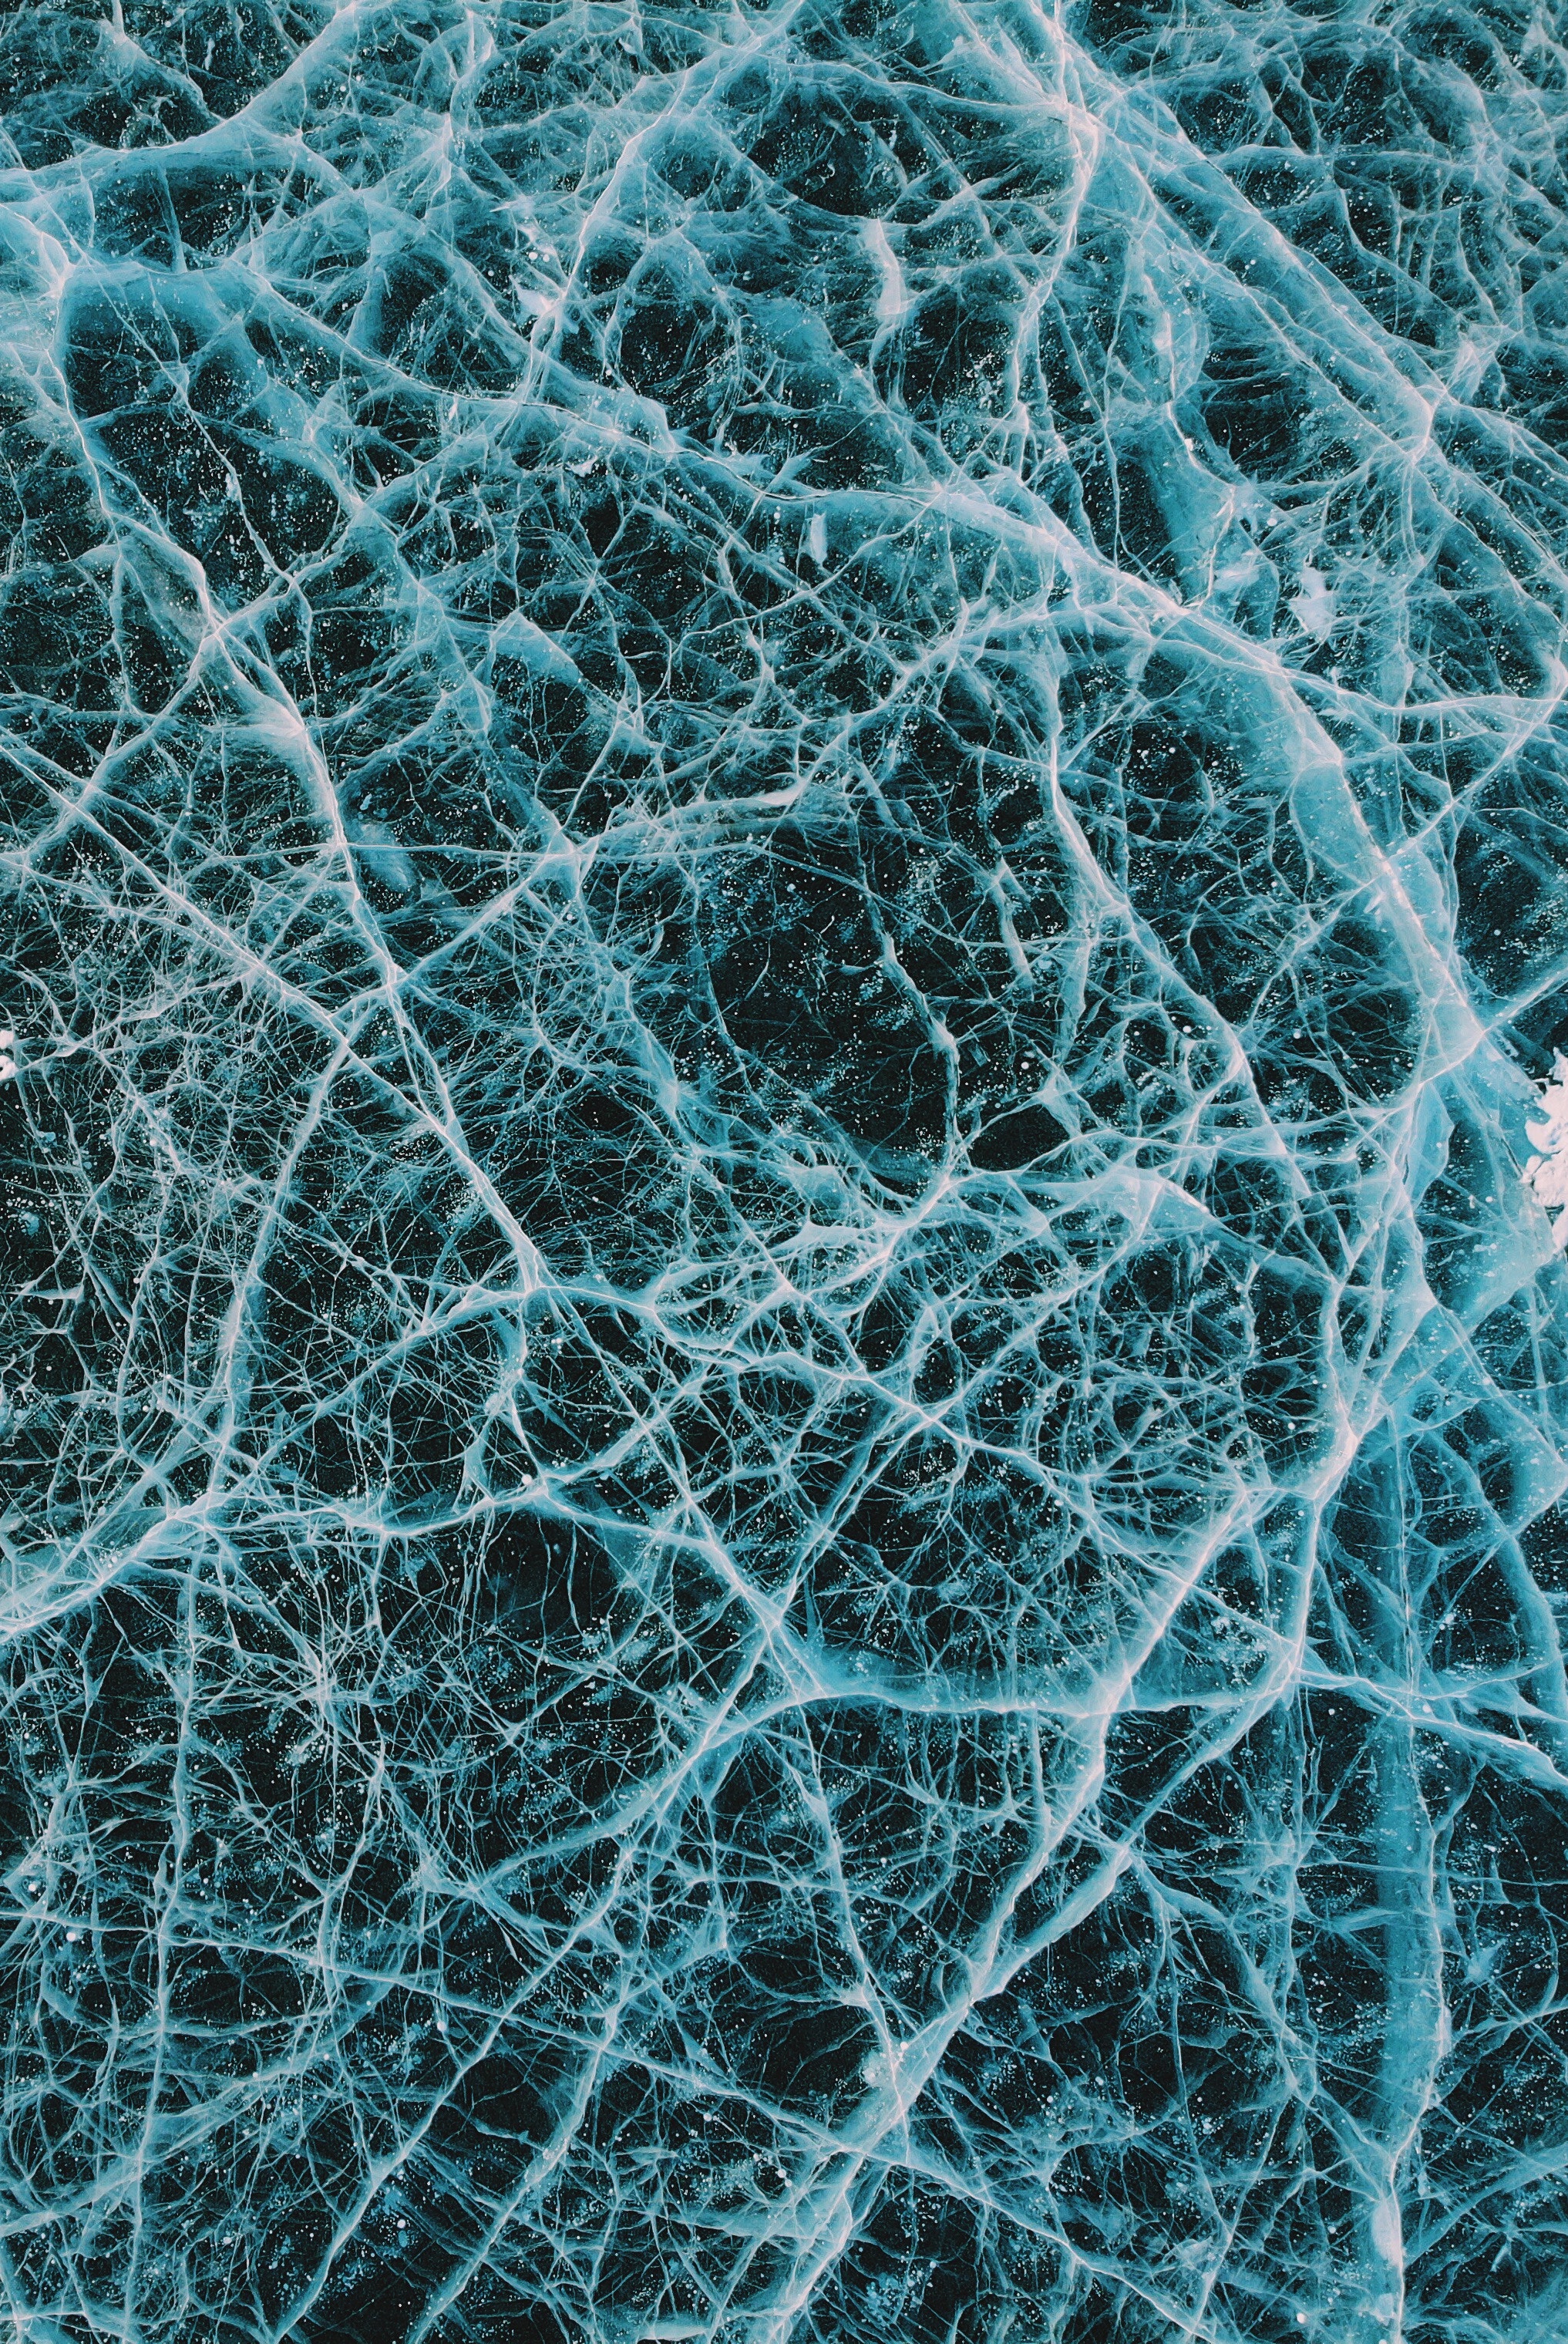 crack, patterns, surface, texture, textures, ice, cracks Full HD